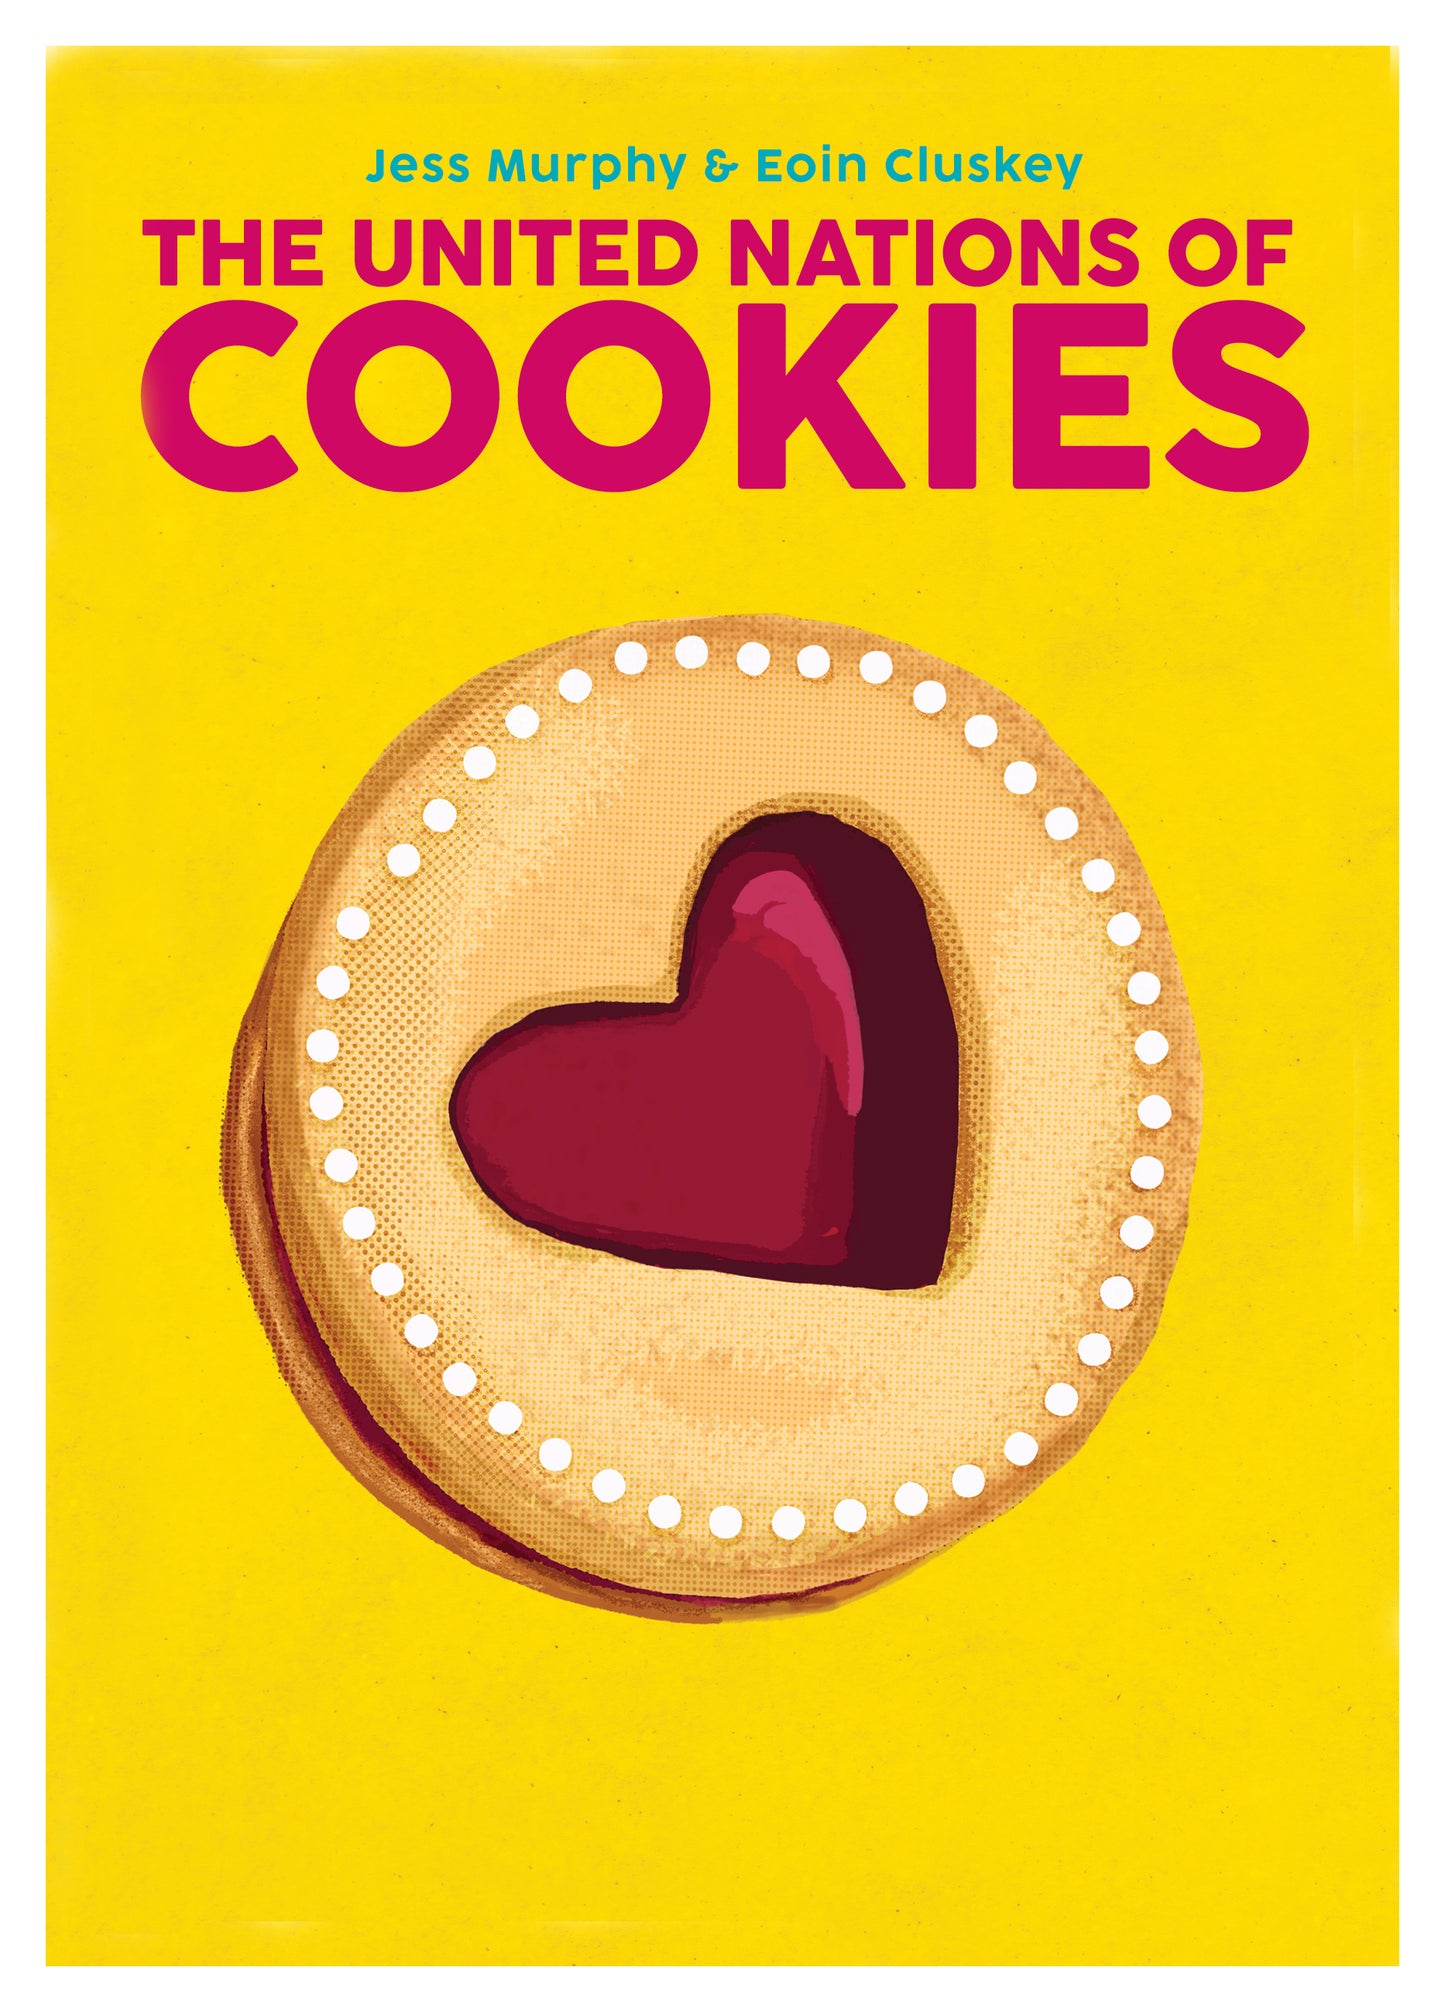 Blasta Books #3: The United Nations of Cookies